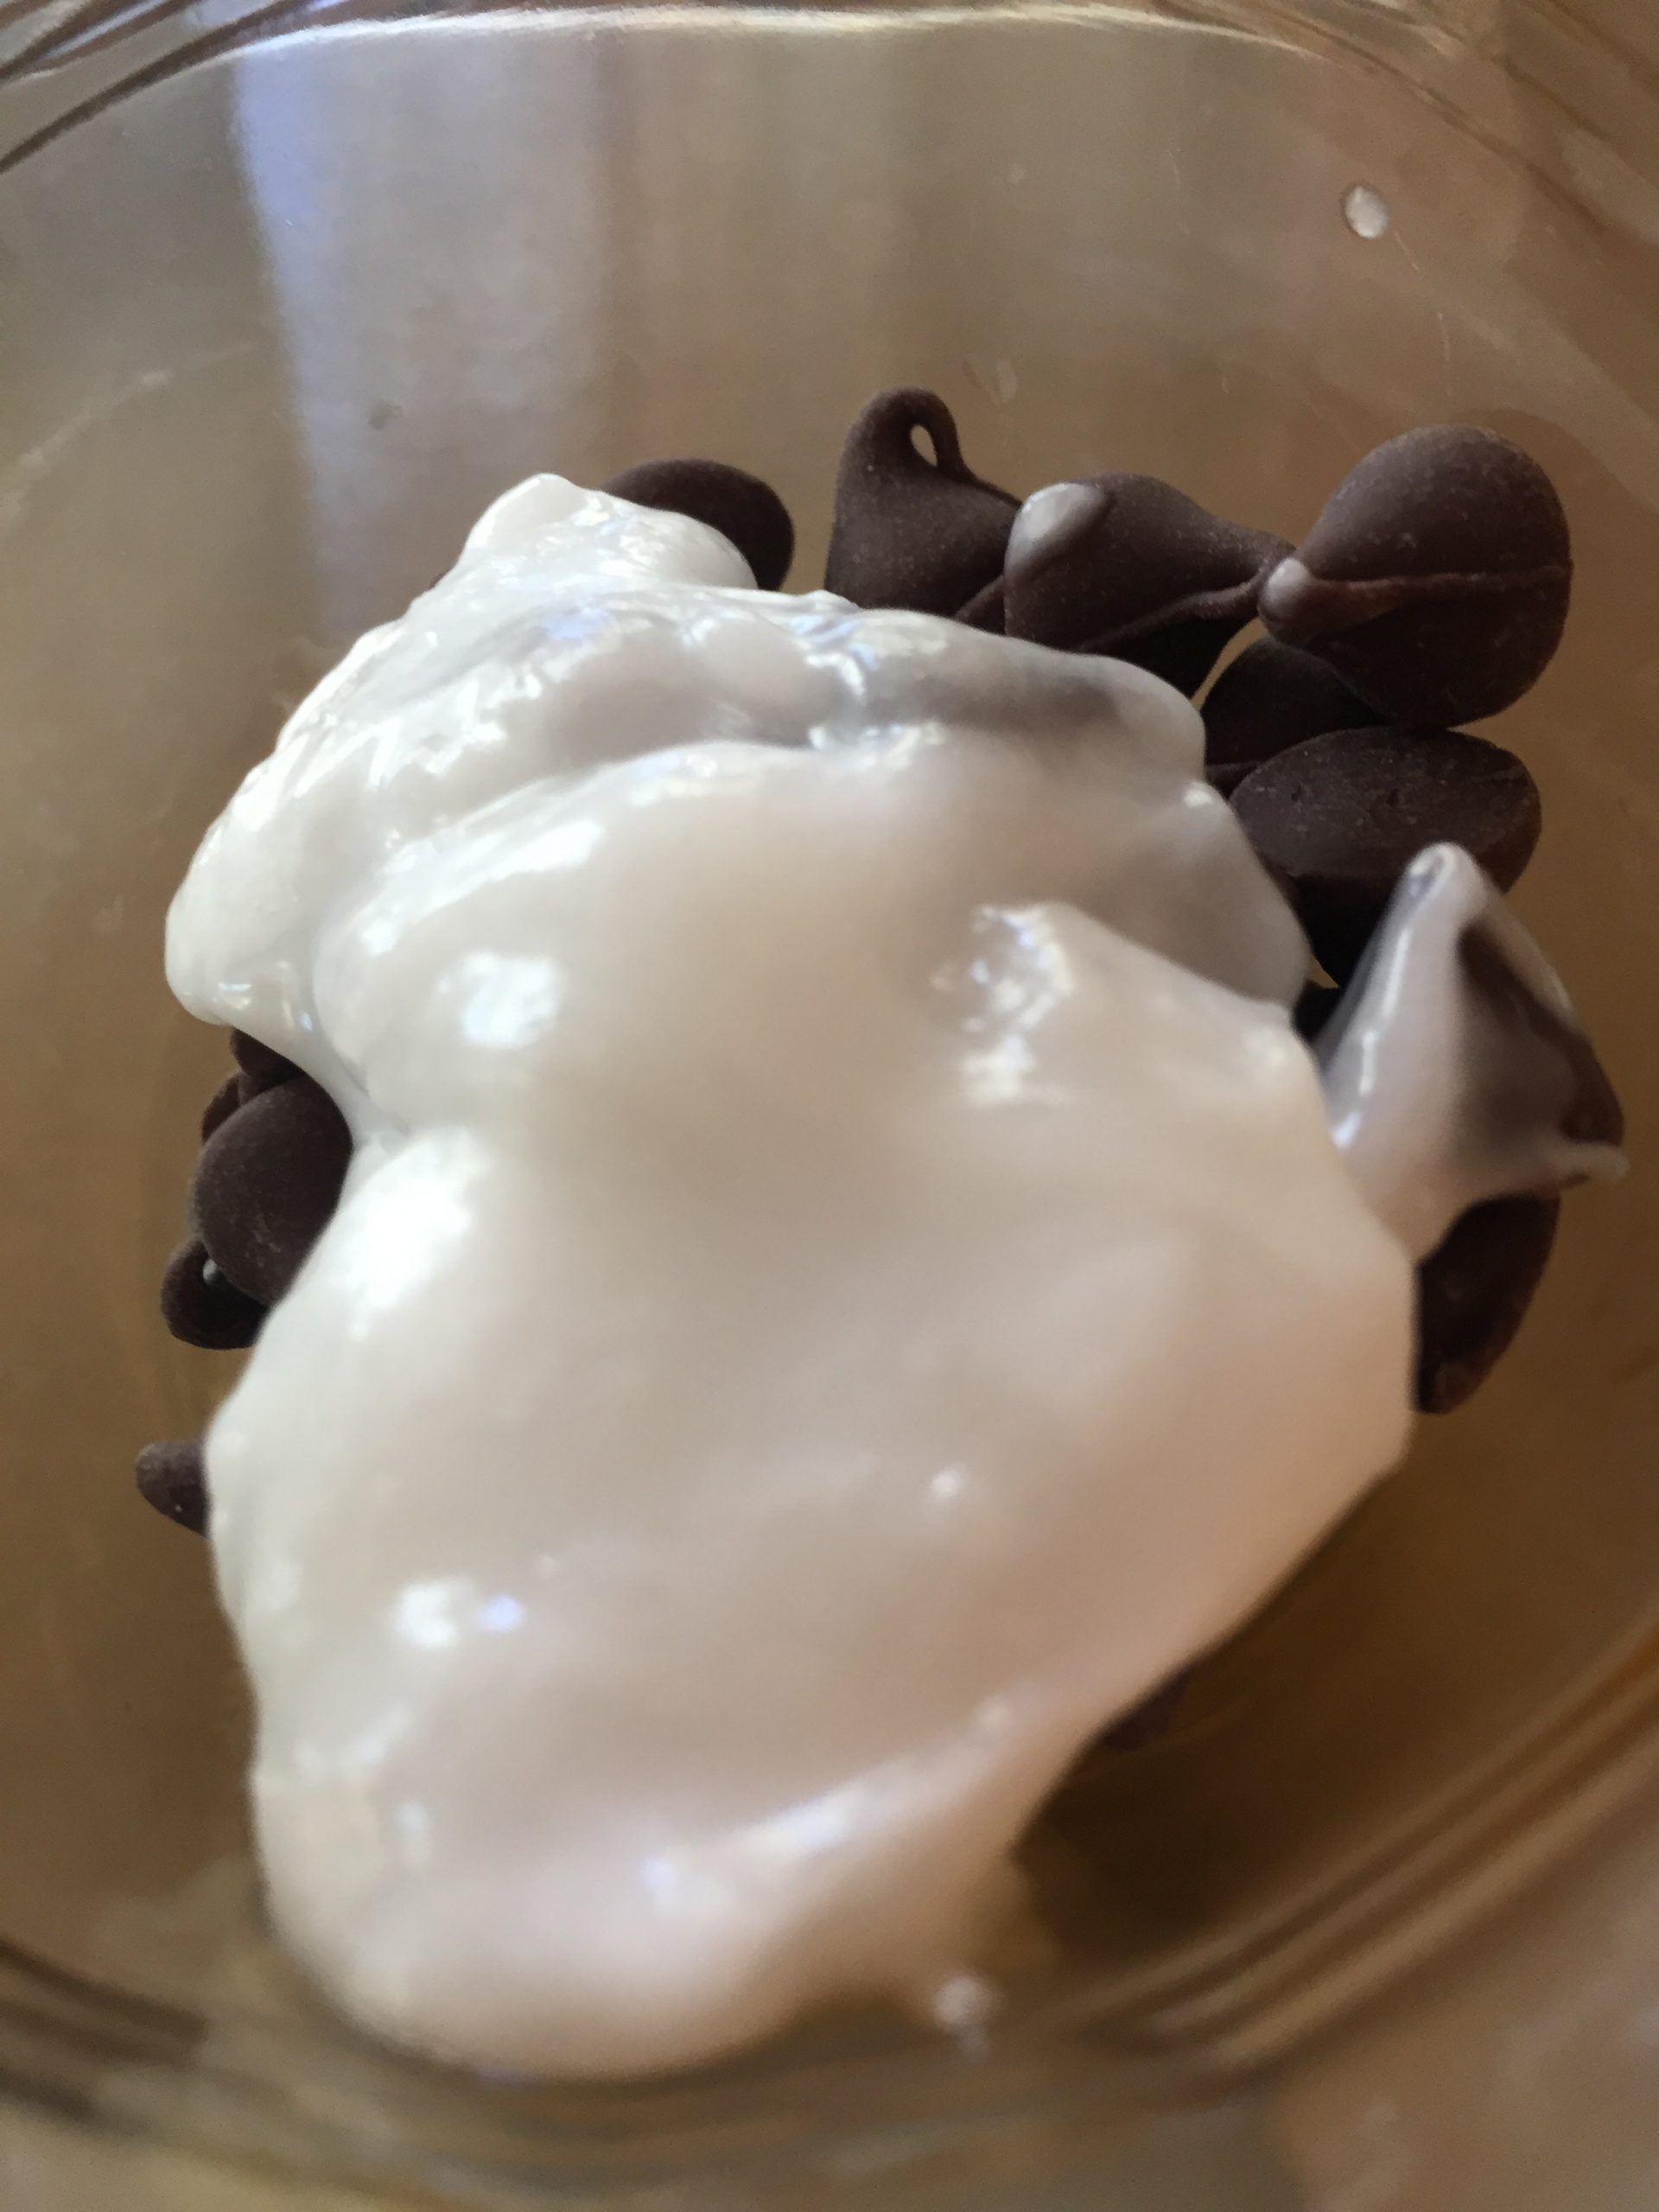 Melt chocolate chips with coconut oil in ramekin for a delicious hard shell chocolate sauce.